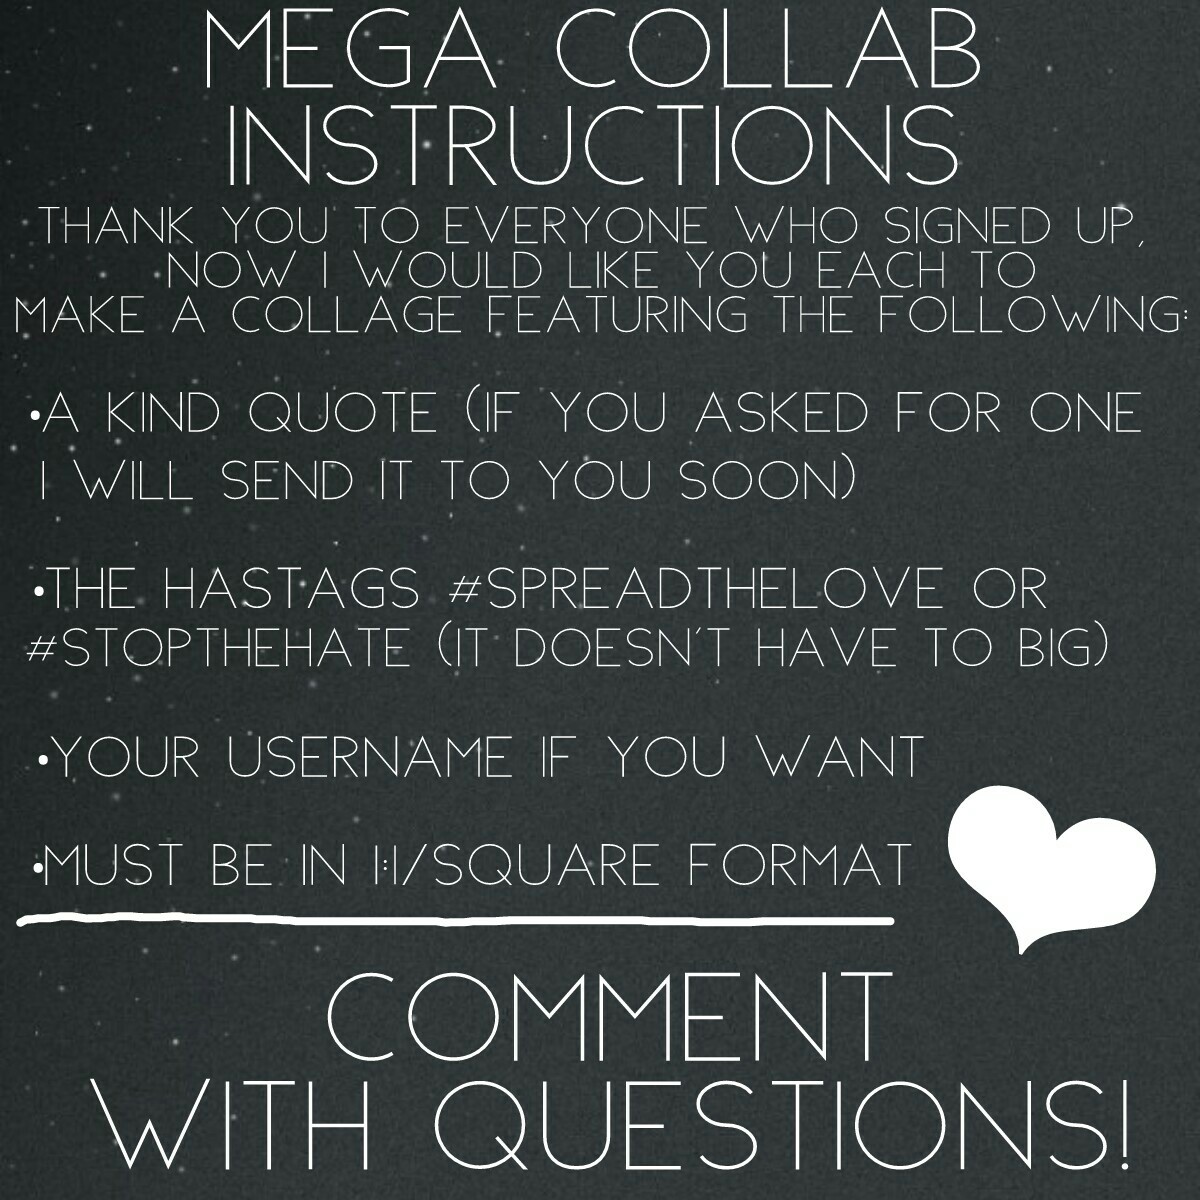 I'm so excited to be hosting my first mega collab! Comment w/ q's!